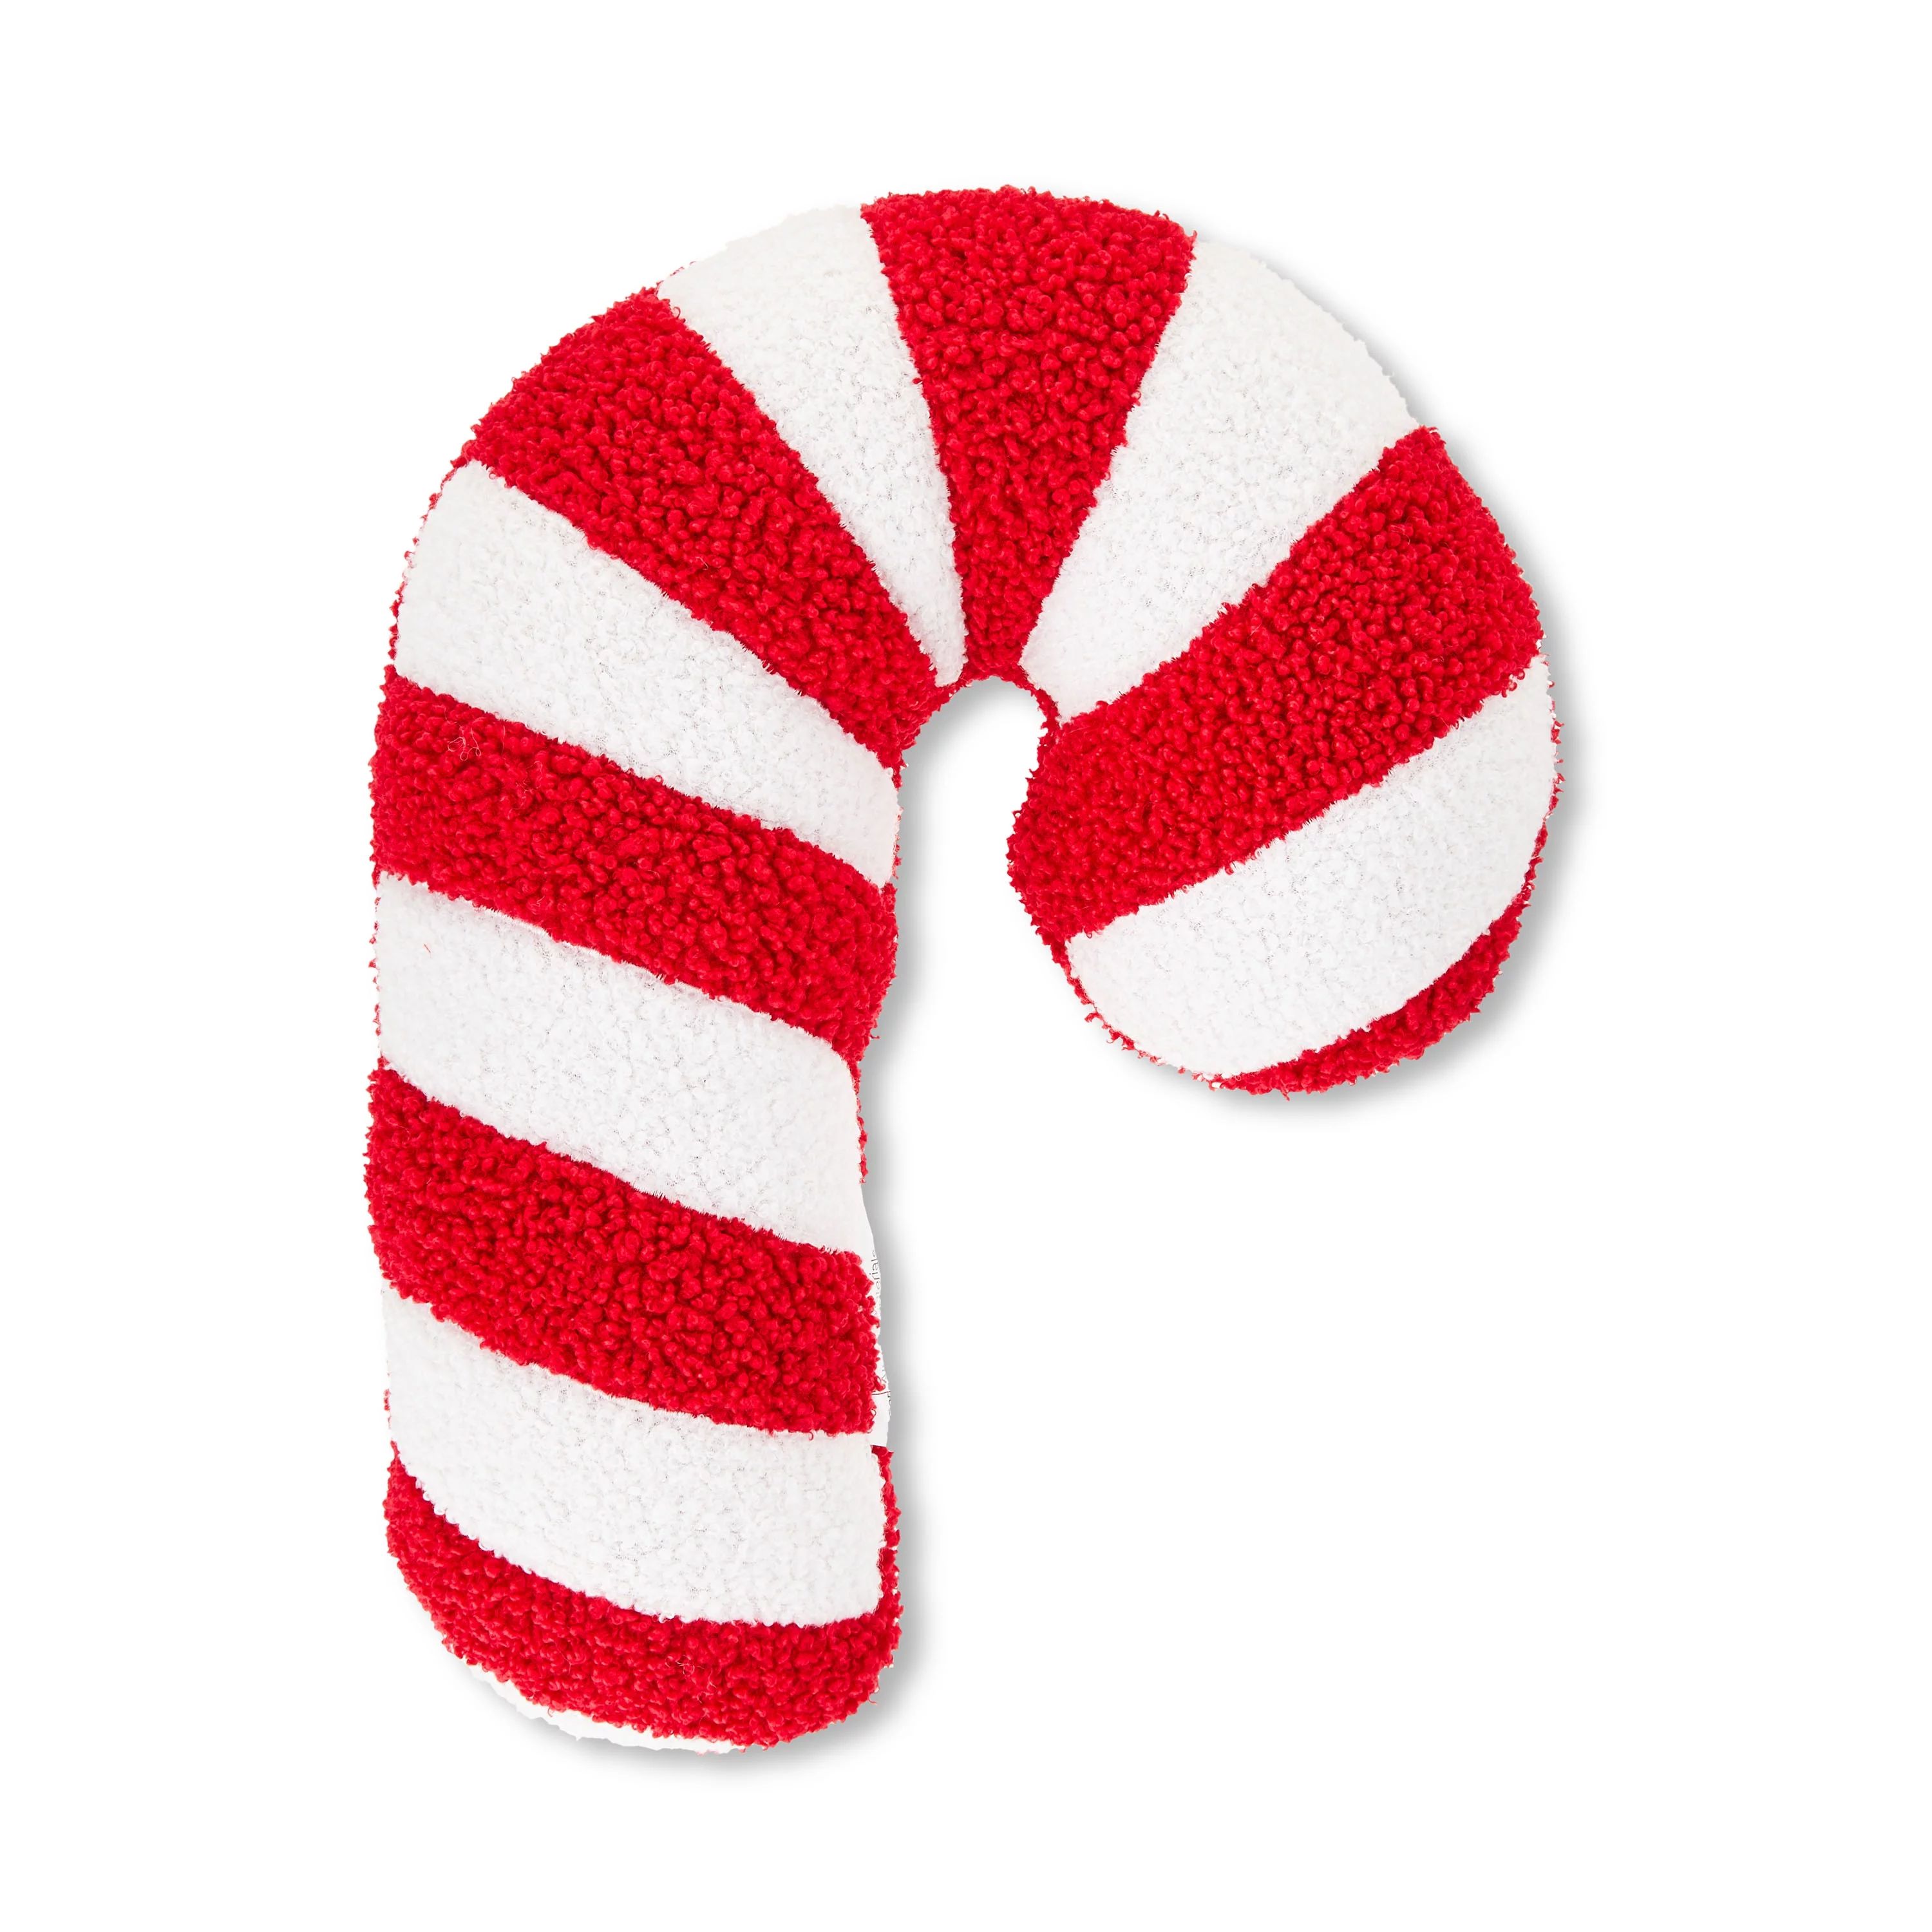 Sherpa Candy Cane 9.5" x 13.5" Decorative Pillow, by Holiday Time | Walmart (US)